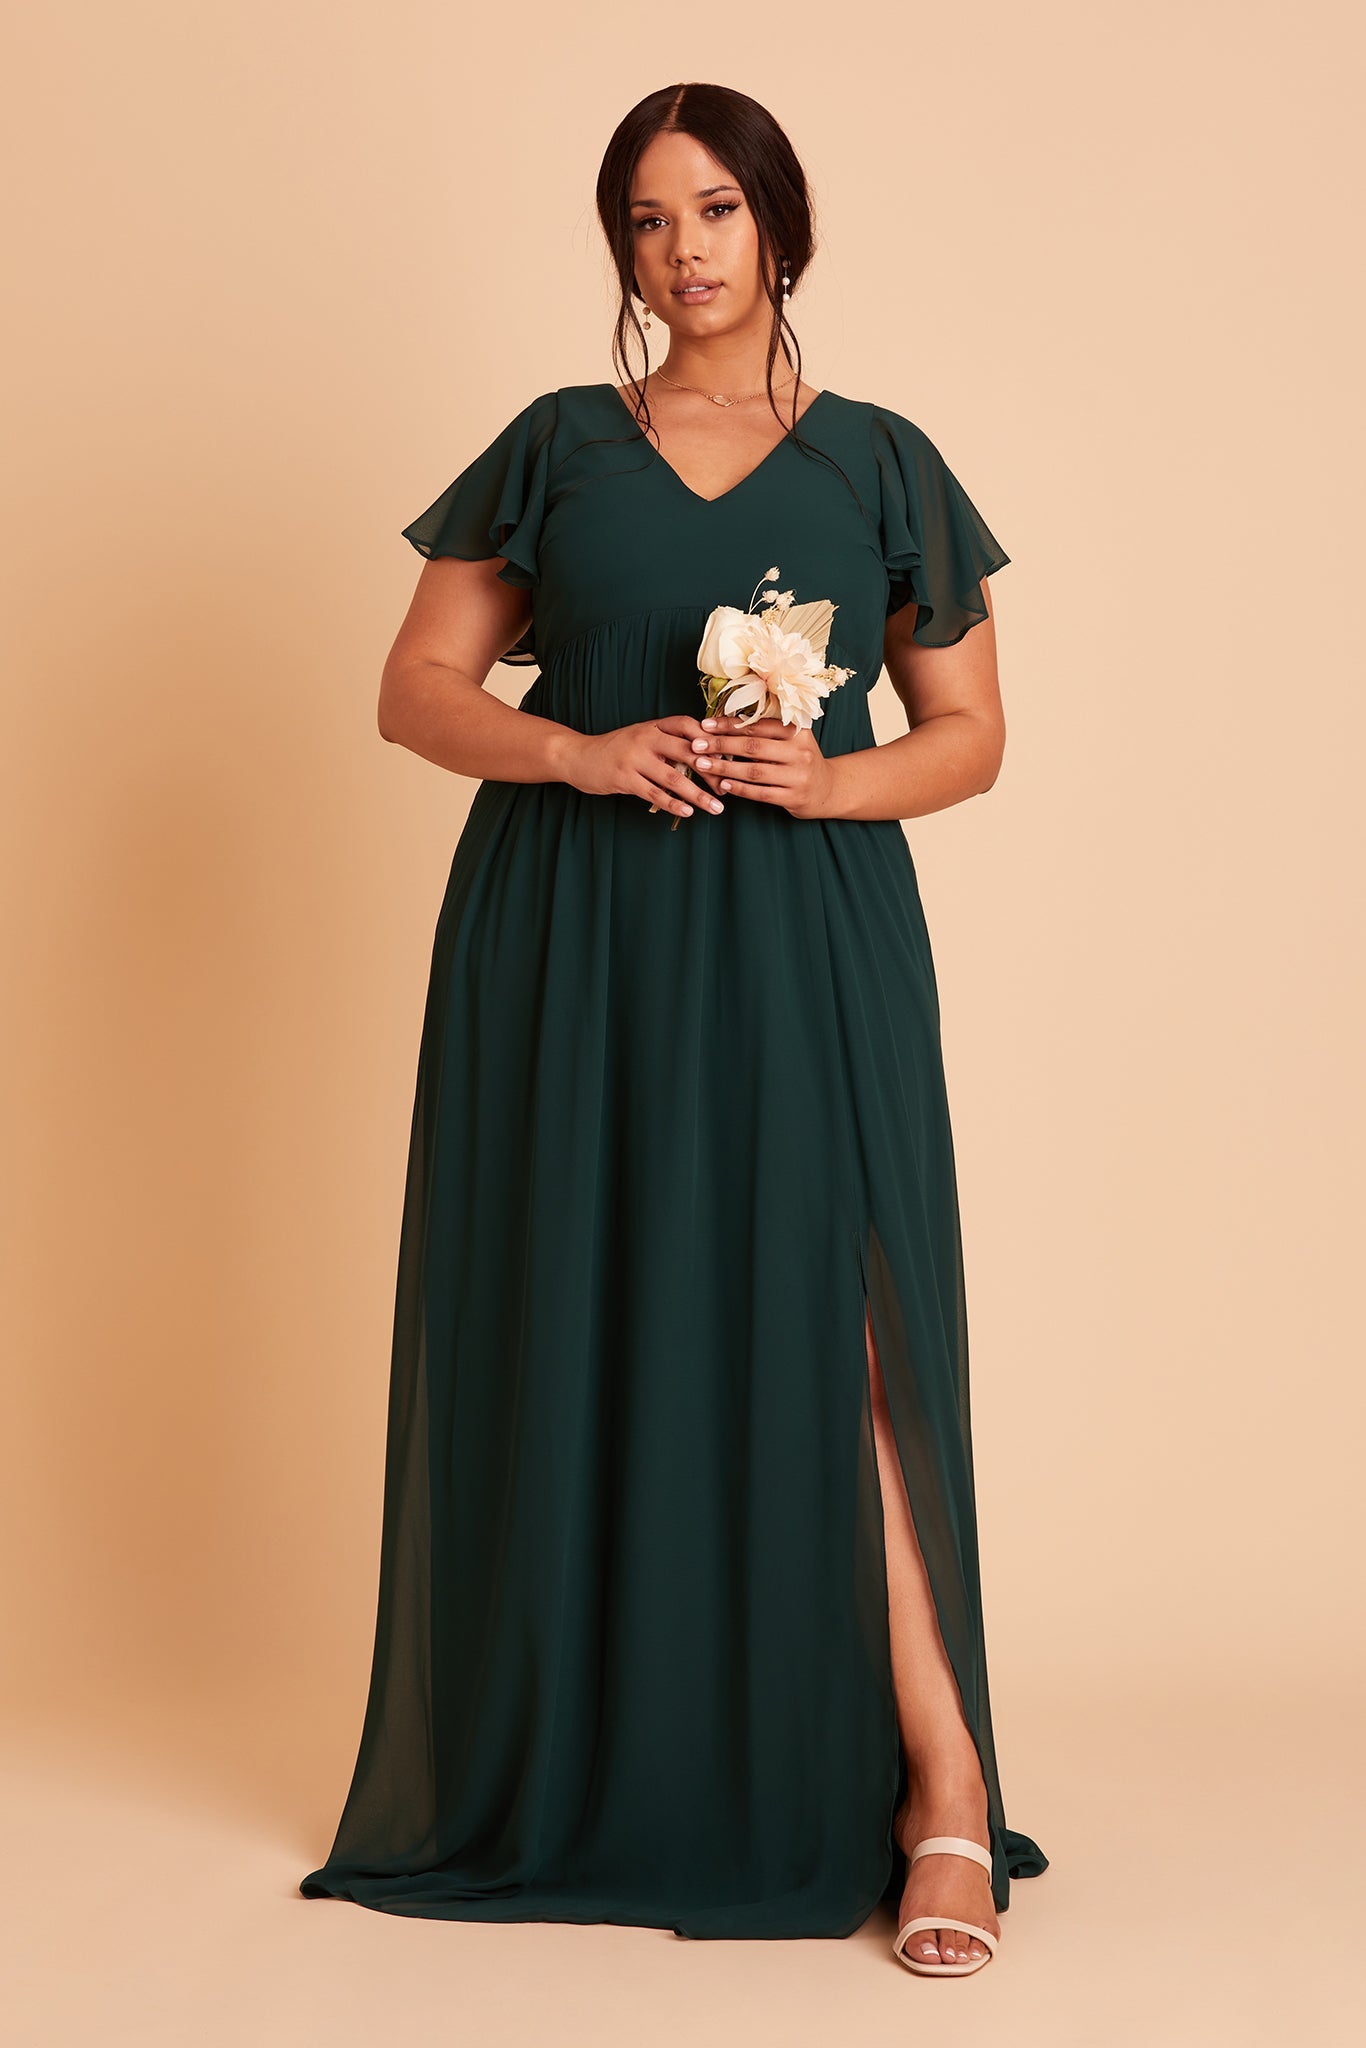 Hannah empire plus size bridesmaid dress in emerald chiffon by Birdy Grey, front view